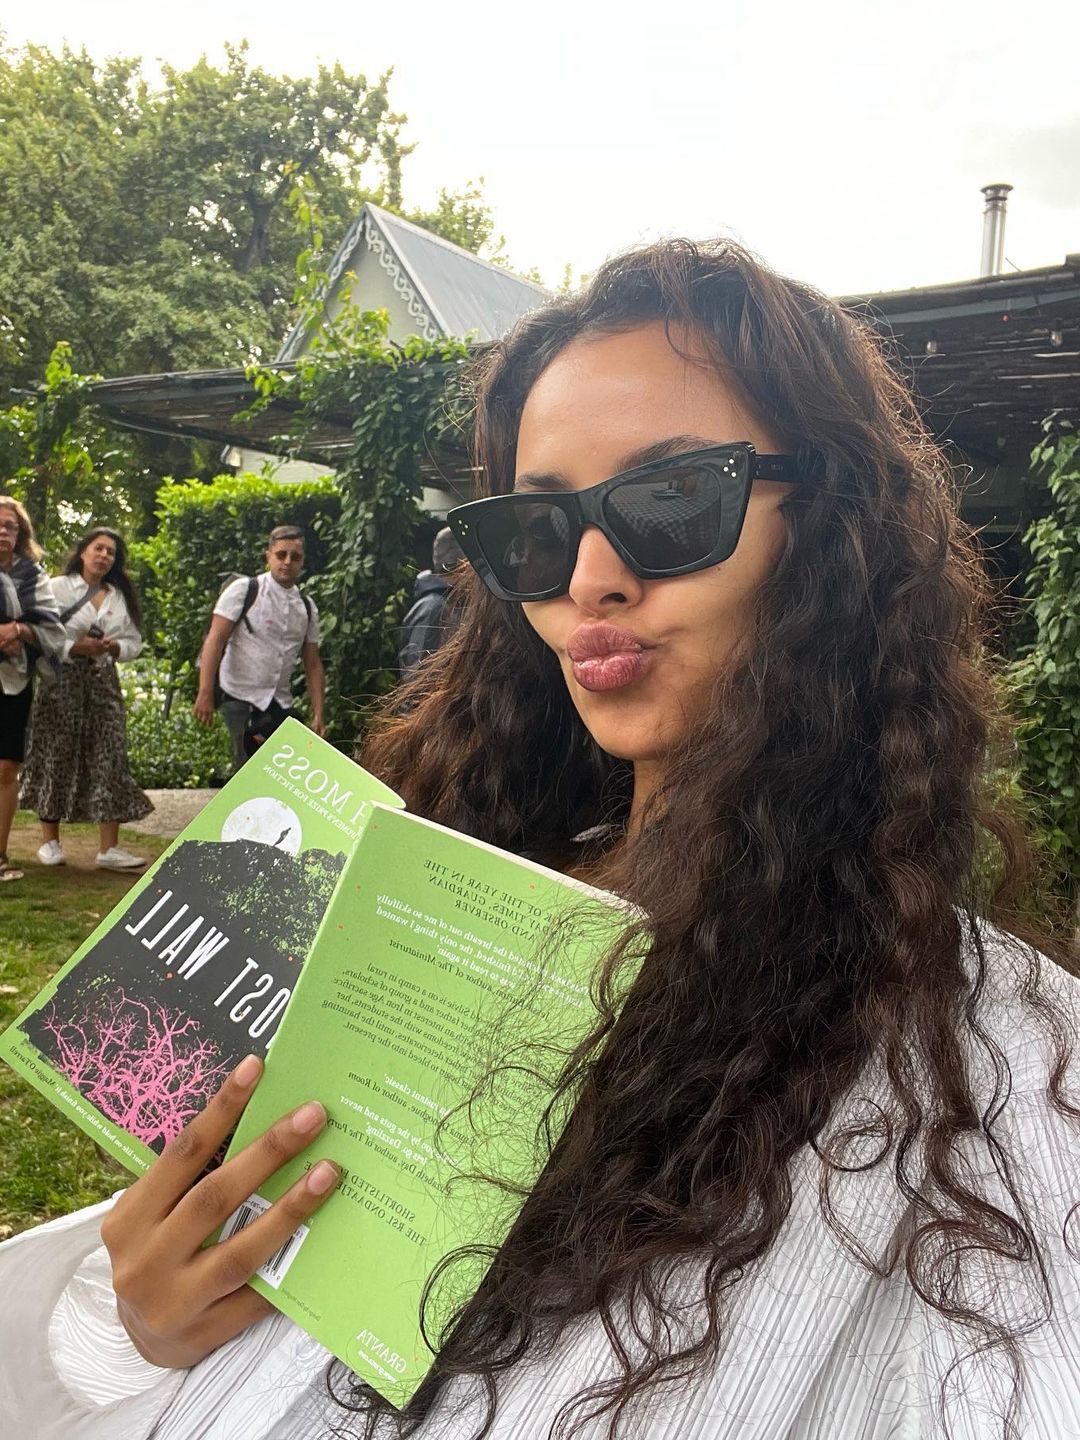 Maya Jama wears a pair of black sunglasses to read a book under a tree in South Africa